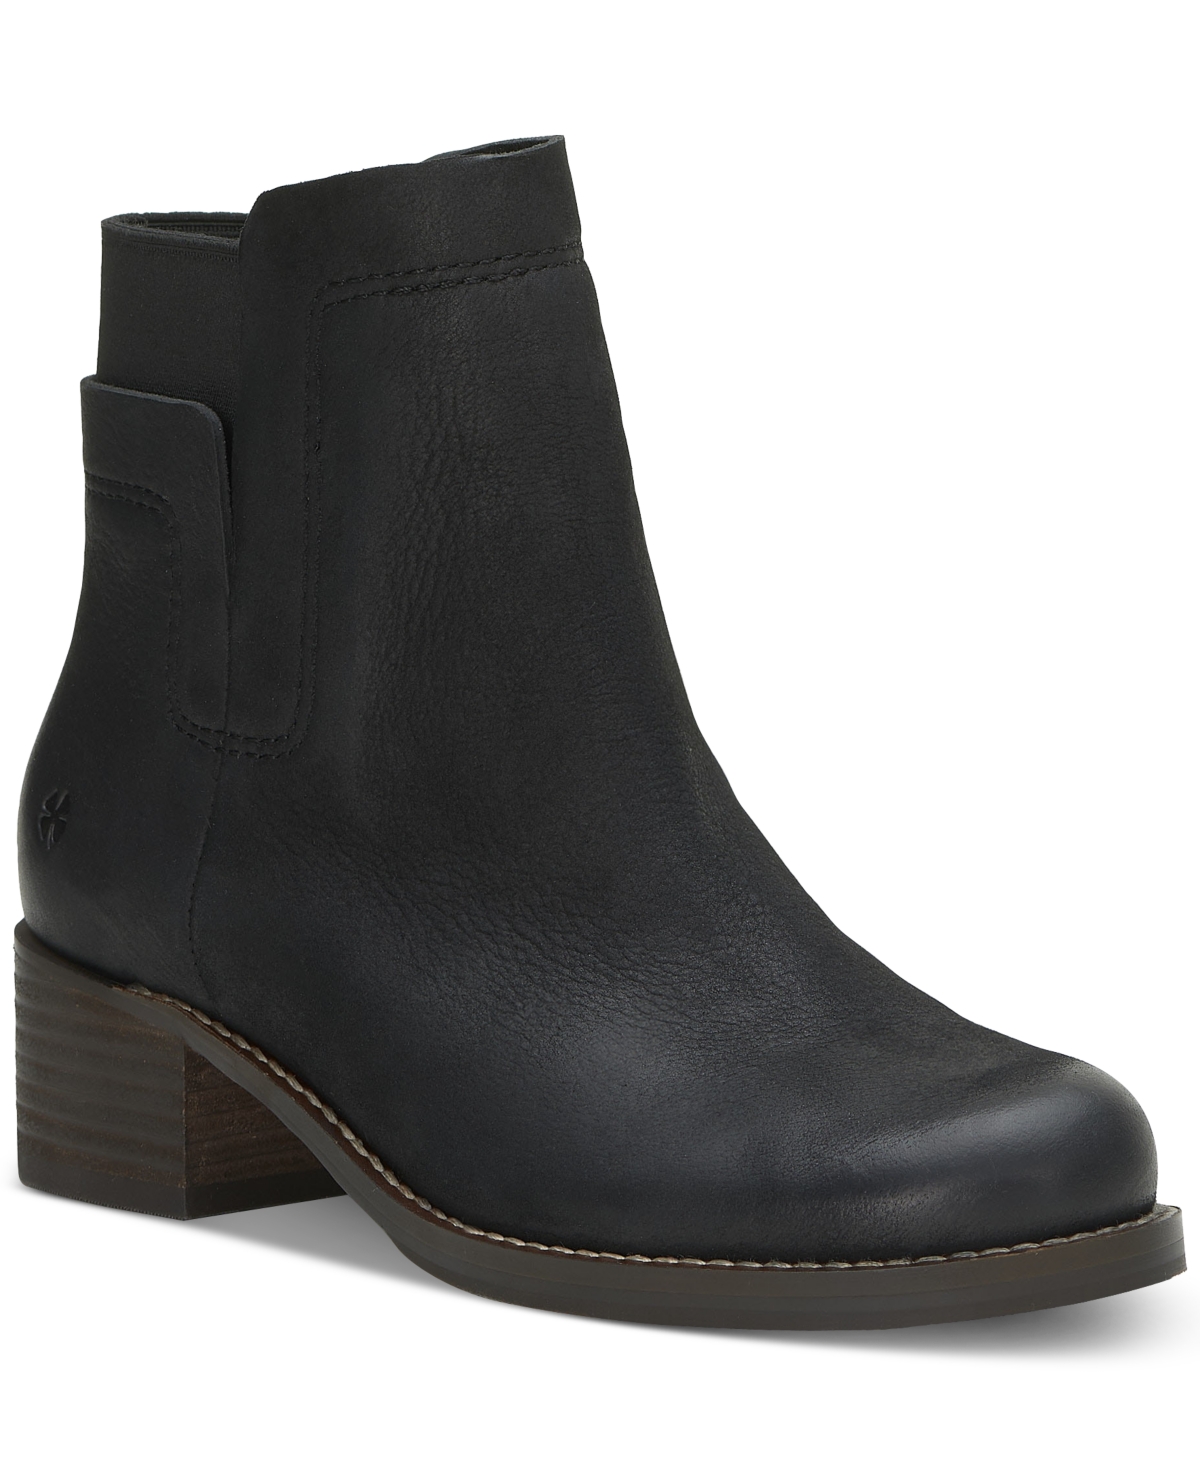 LUCKY BRAND WOMEN'S HIRSI PULL-ON ANKLE BOOTIES